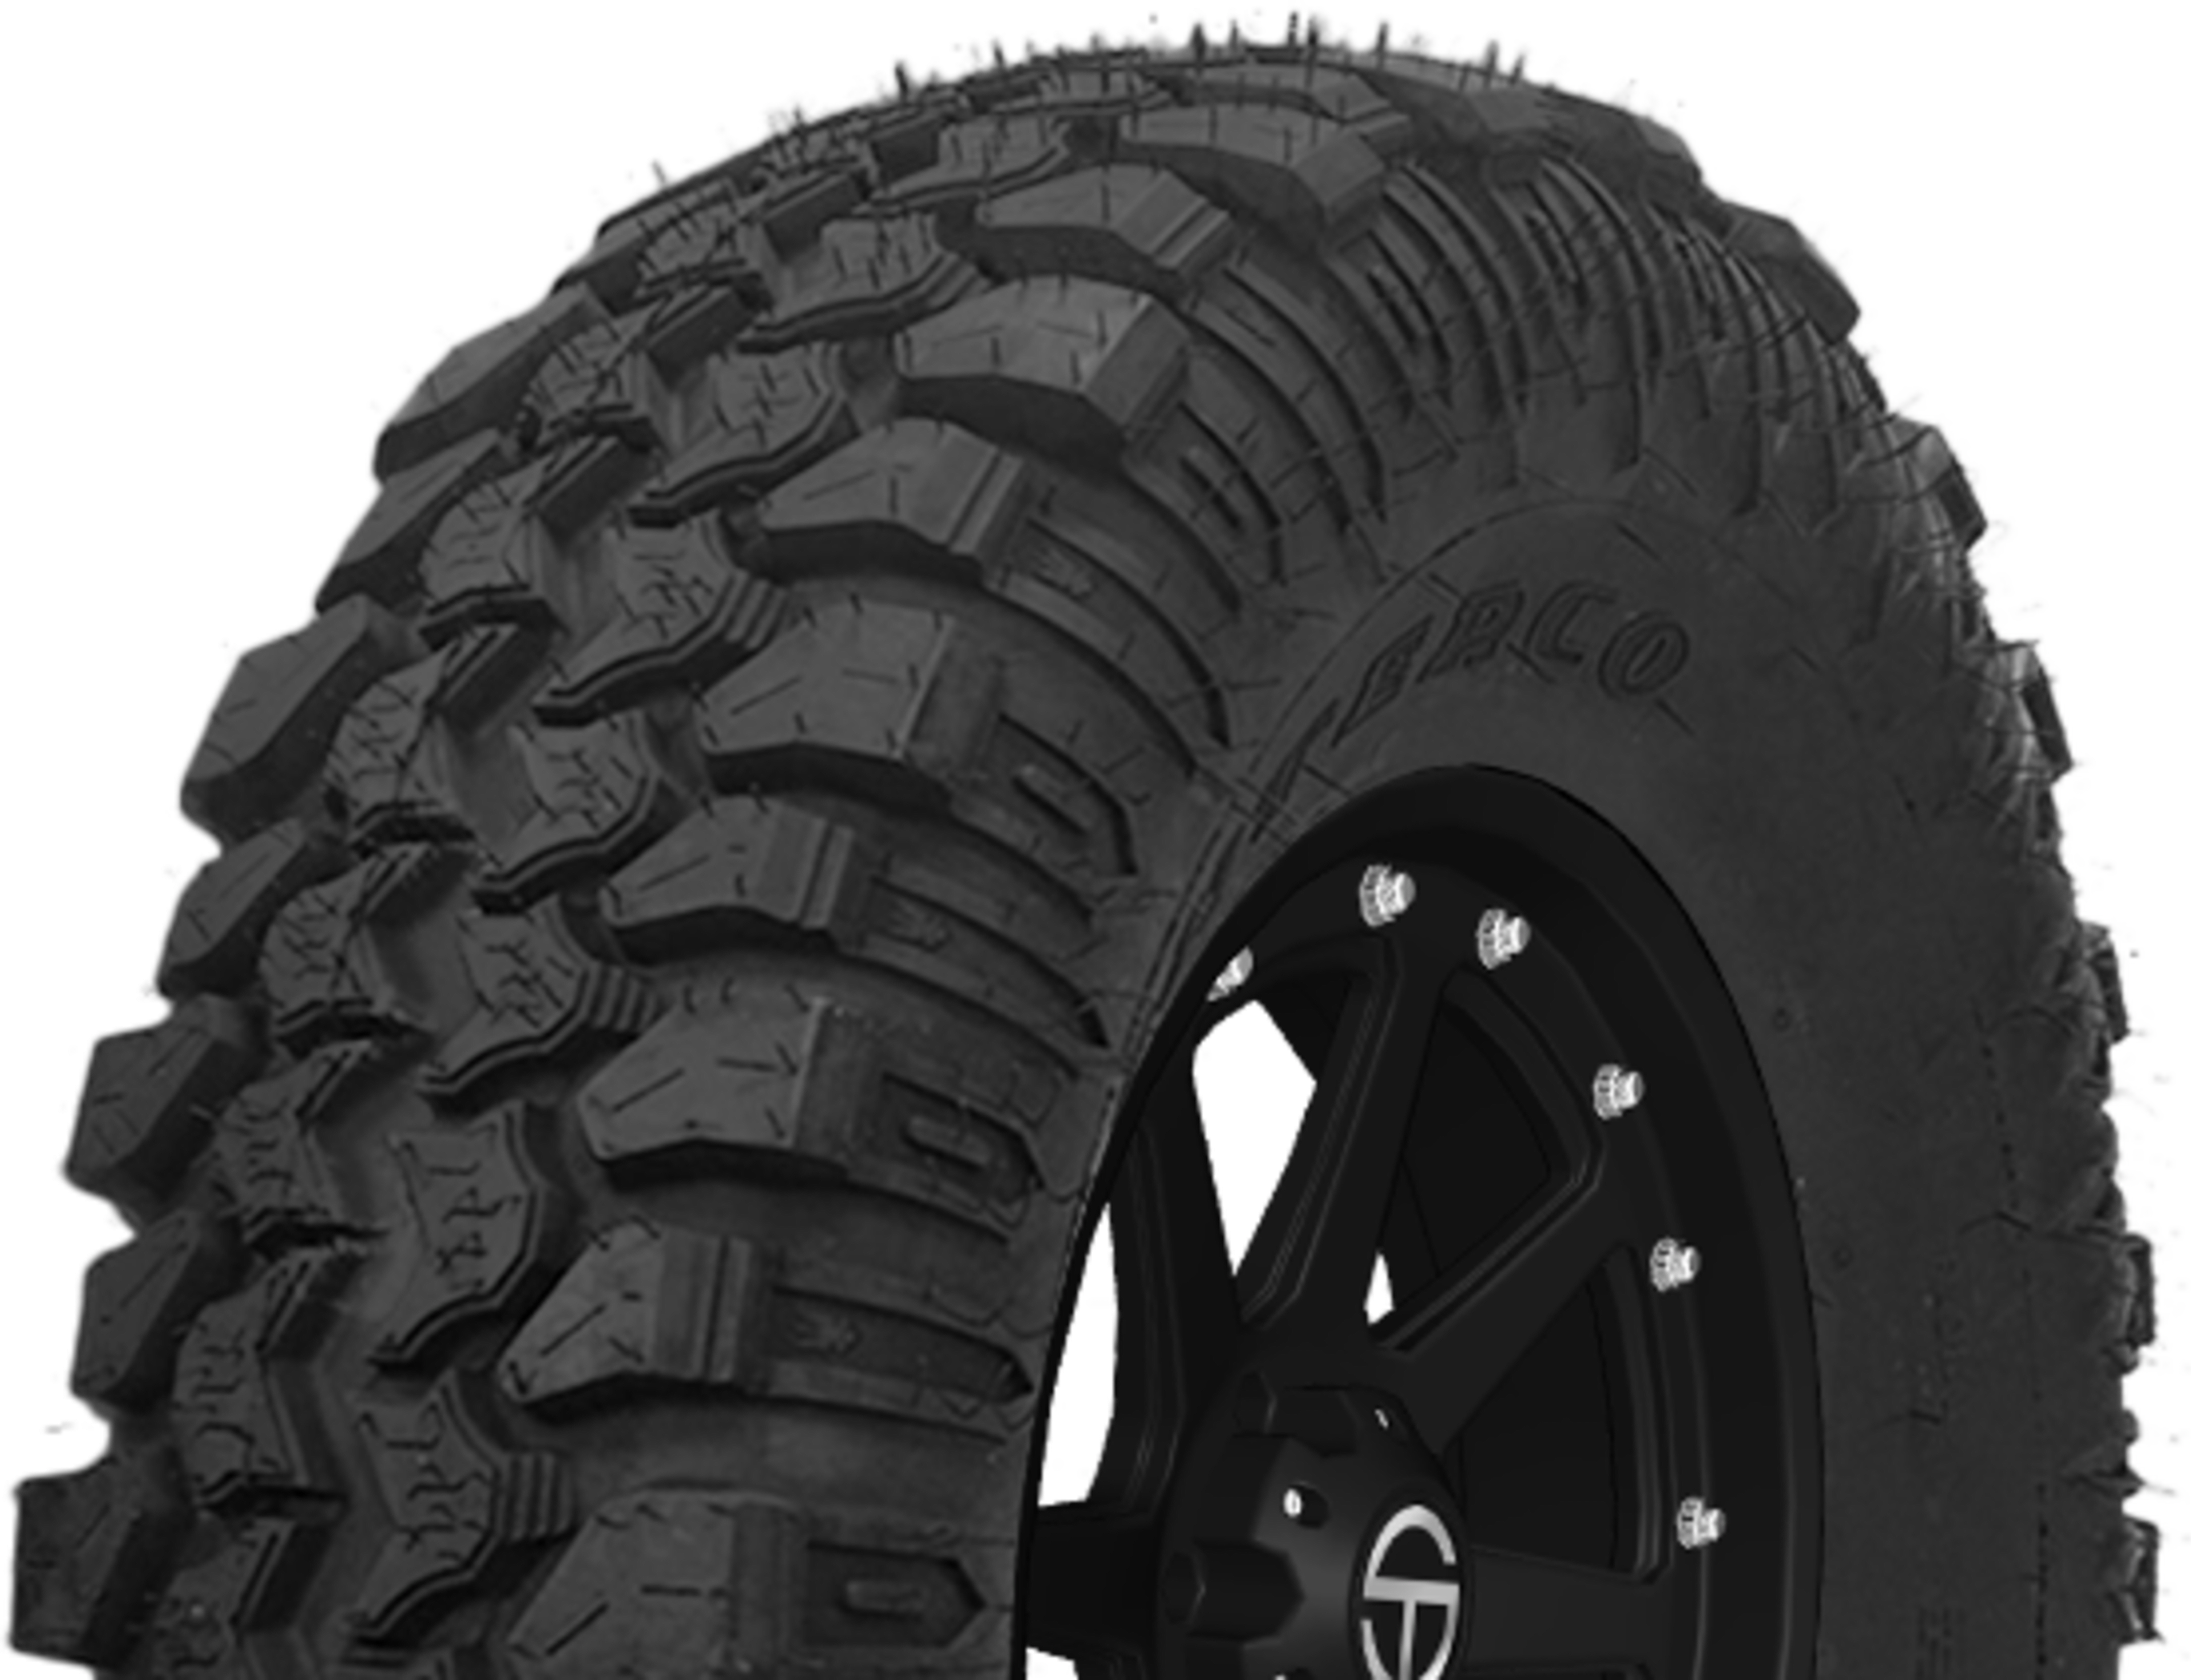 Shop for 35/12.50R16.5 Tires for Your Vehicle | SimpleTire